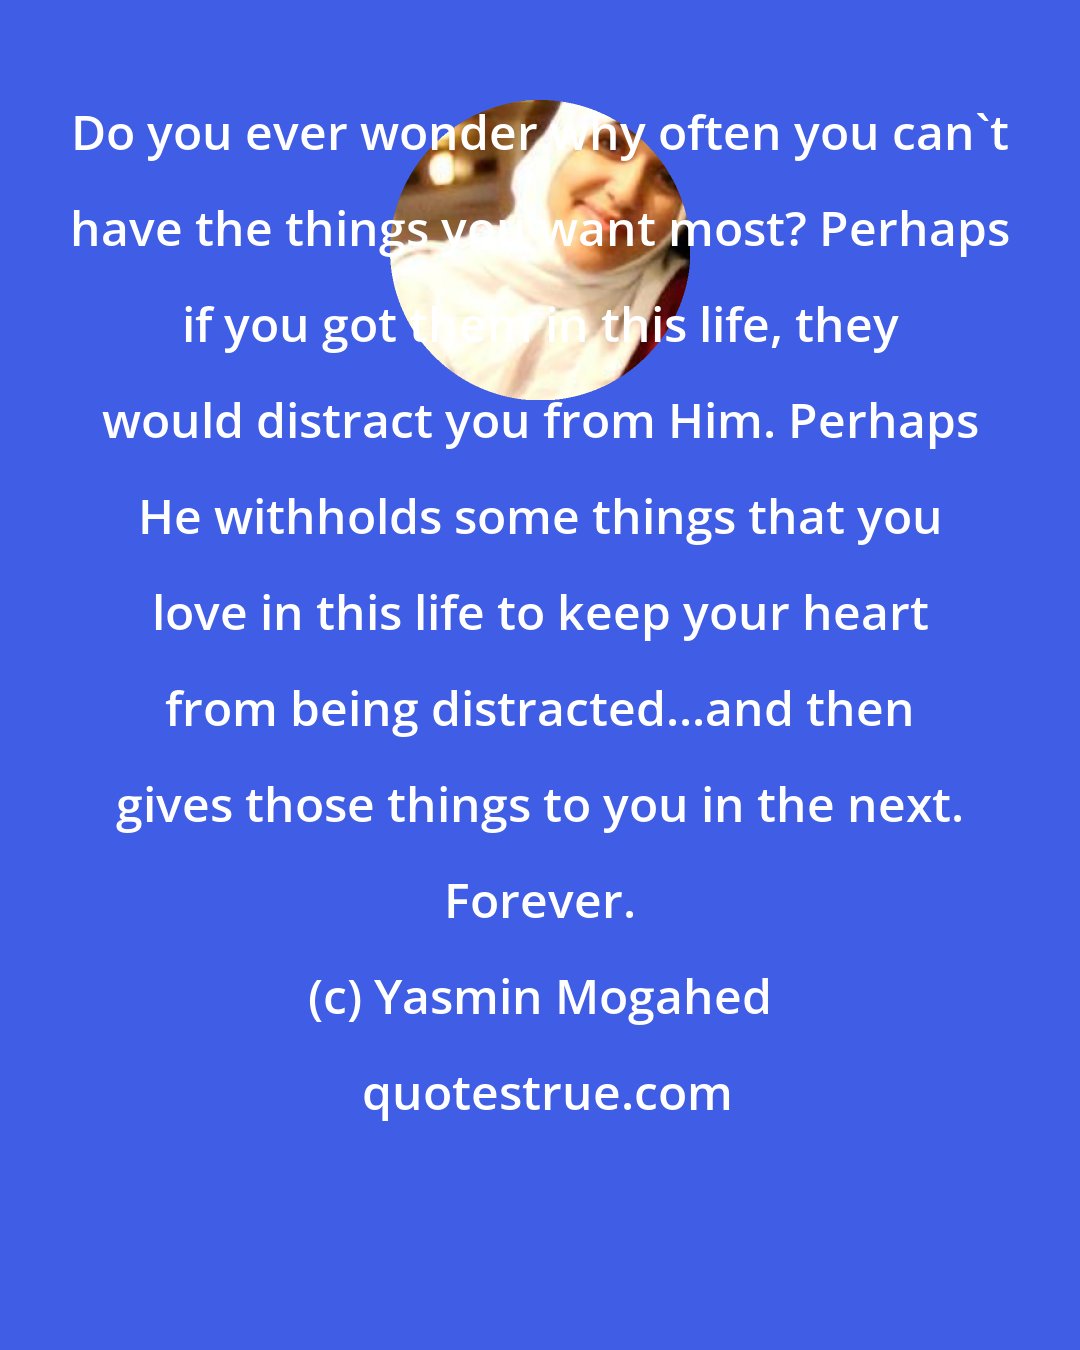 Yasmin Mogahed: Do you ever wonder why often you can't have the things you want most? Perhaps if you got them in this life, they would distract you from Him. Perhaps He withholds some things that you love in this life to keep your heart from being distracted...and then gives those things to you in the next. Forever.